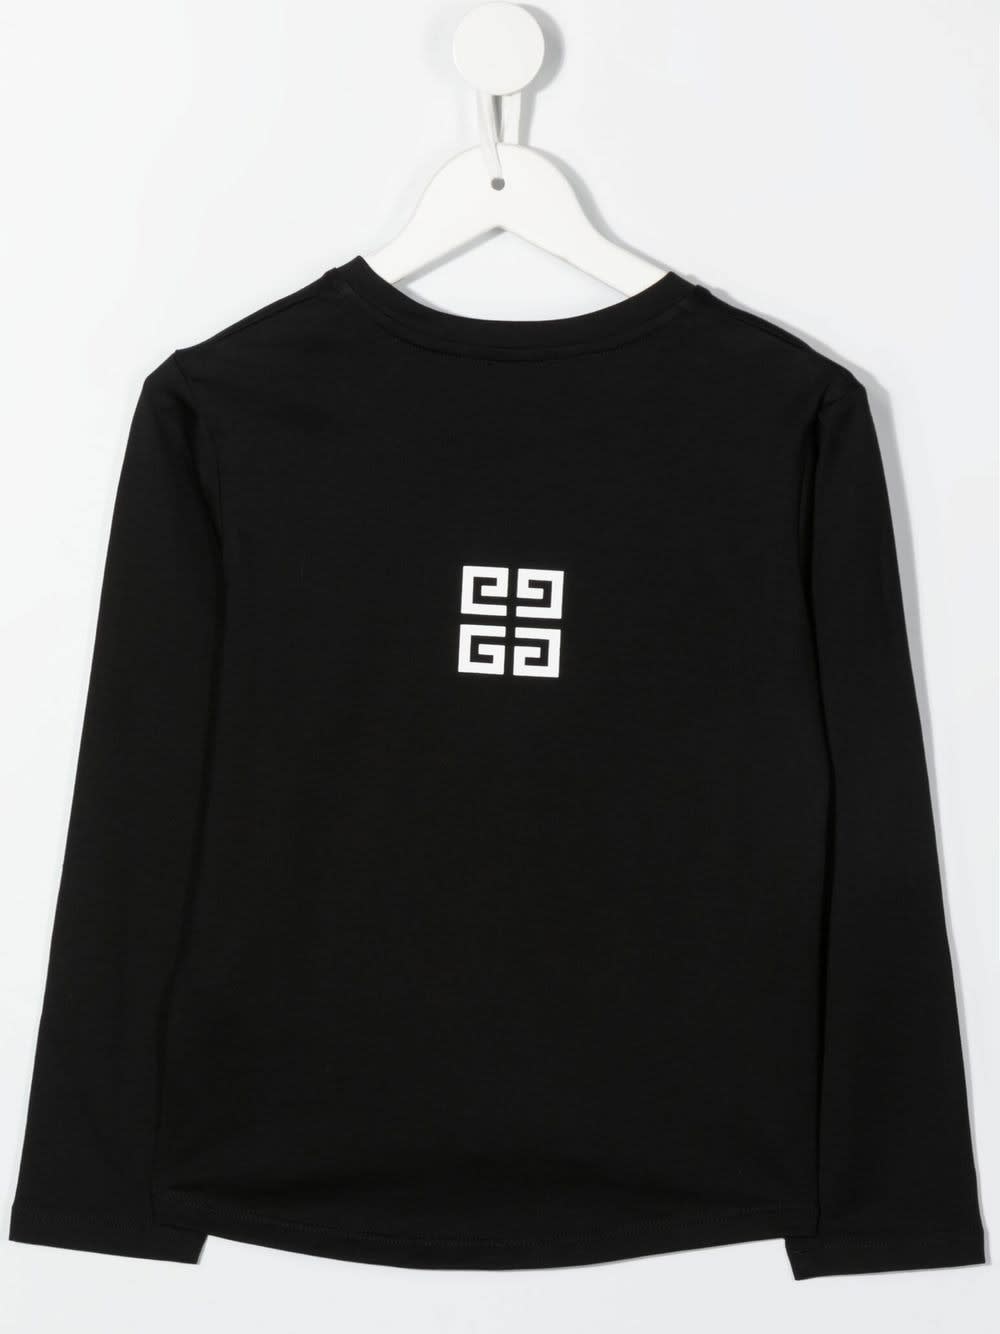 Shop Givenchy Kids Black Long Sleeve T-shirt With Signature And Logo